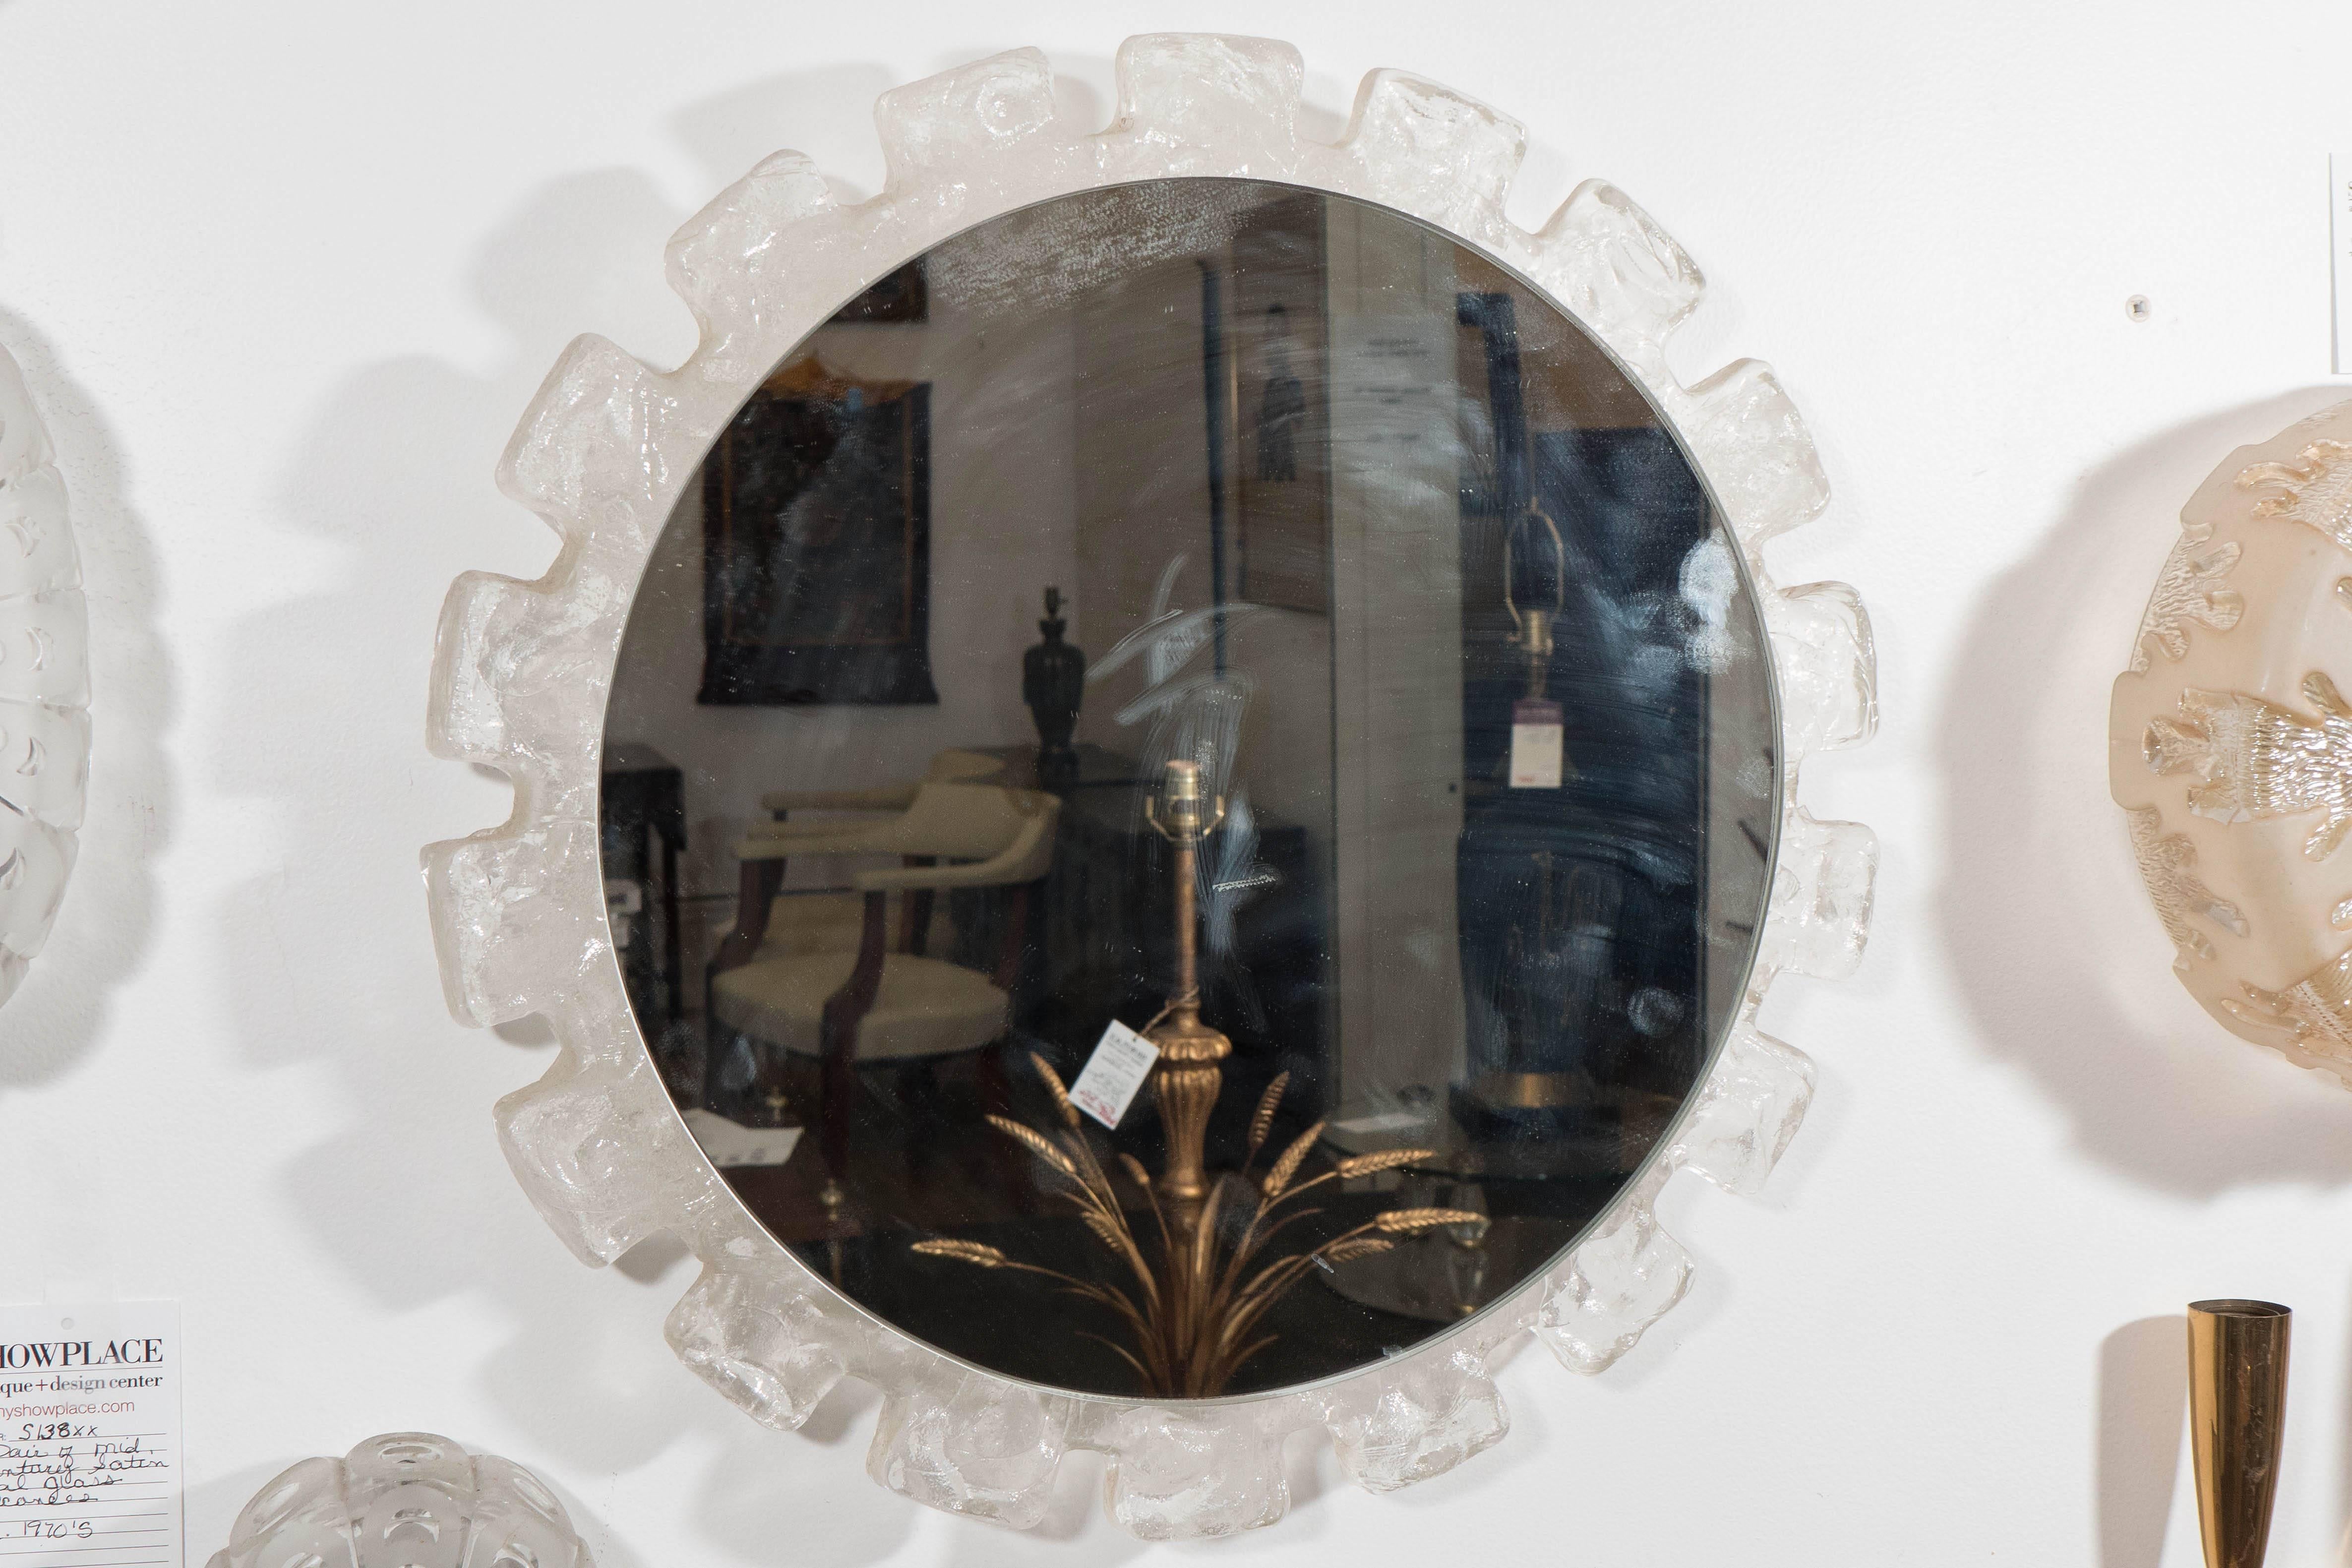 A vintage circular wall mirror, produced circa 1960s, inset within a sunburst frame in Austrian 'Ice Block' textured glass. Very good condition, consistent with age and prior use.